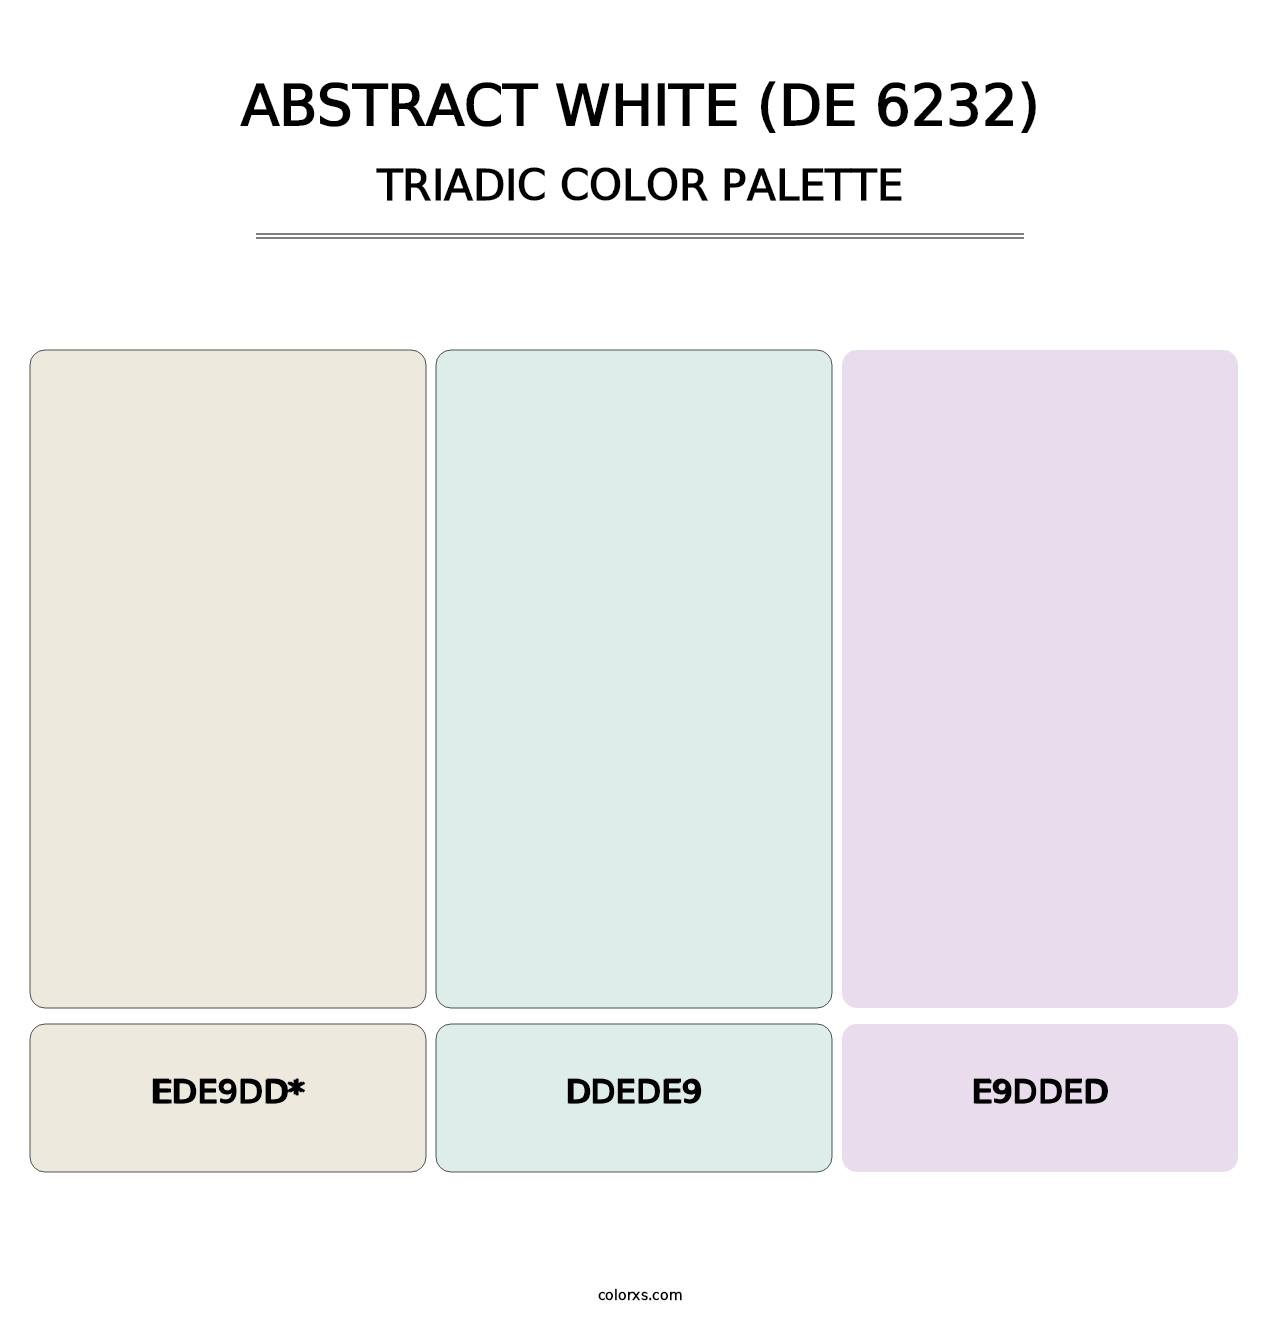 Abstract White (DE 6232) - Triadic Color Palette